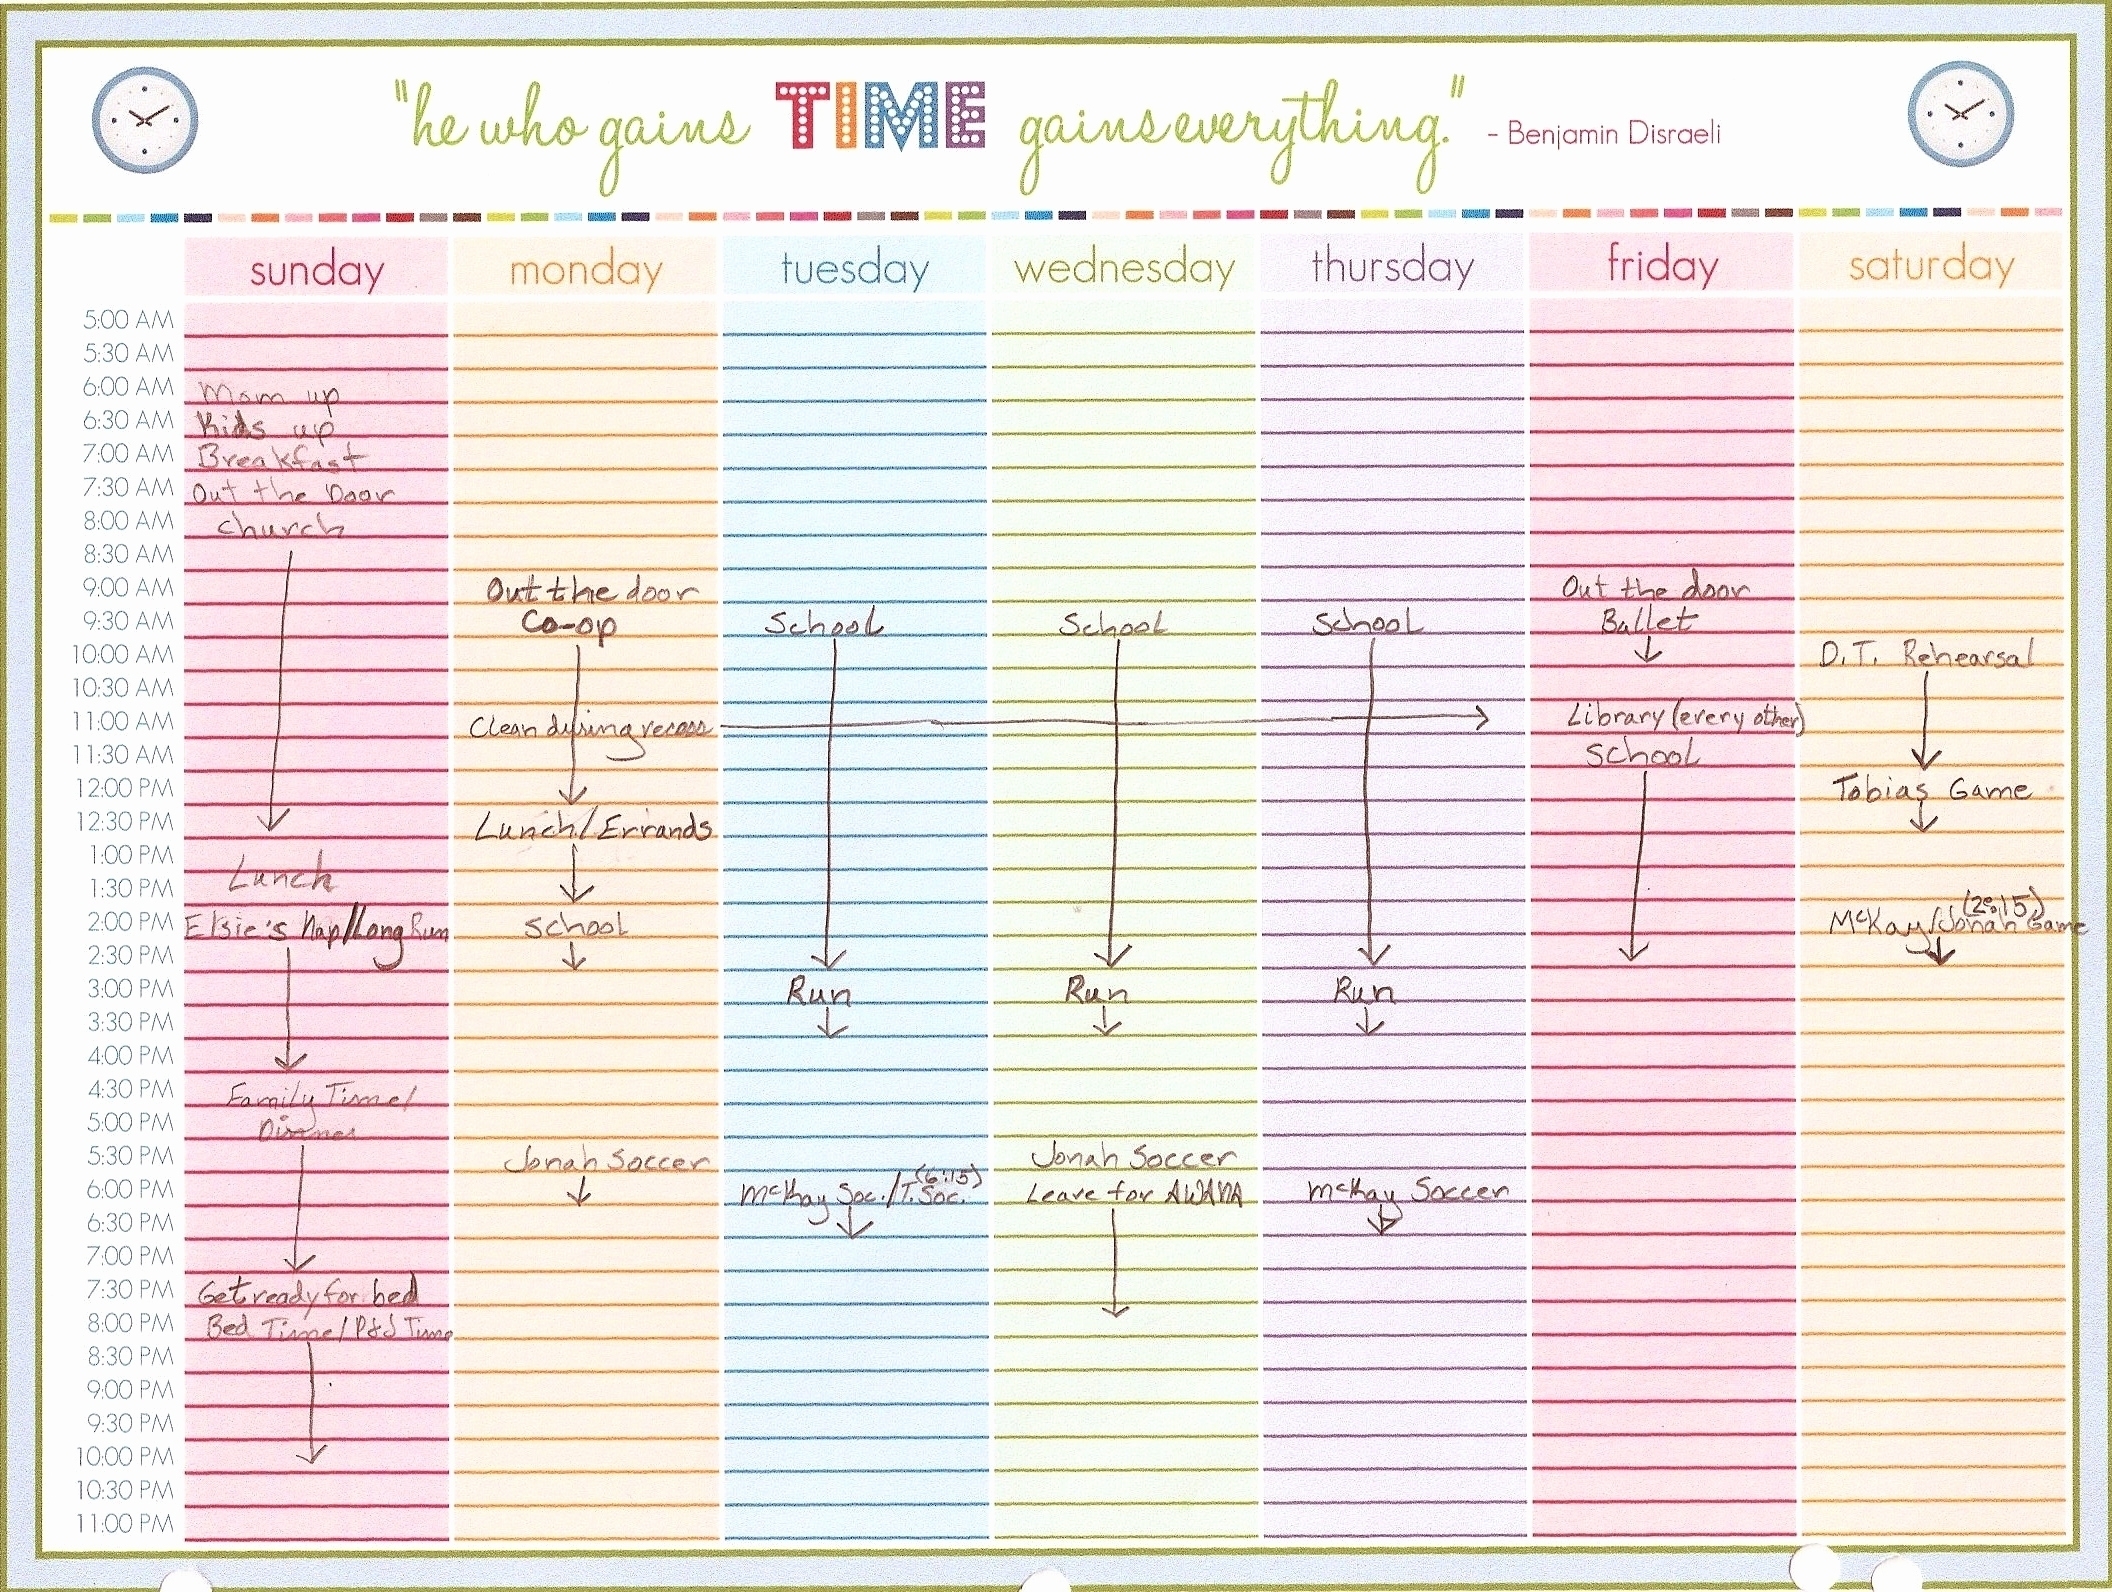 Printable Calendar With Time Slots - Calendar Inspiration Design in Schedule With Time Slots 6 Am